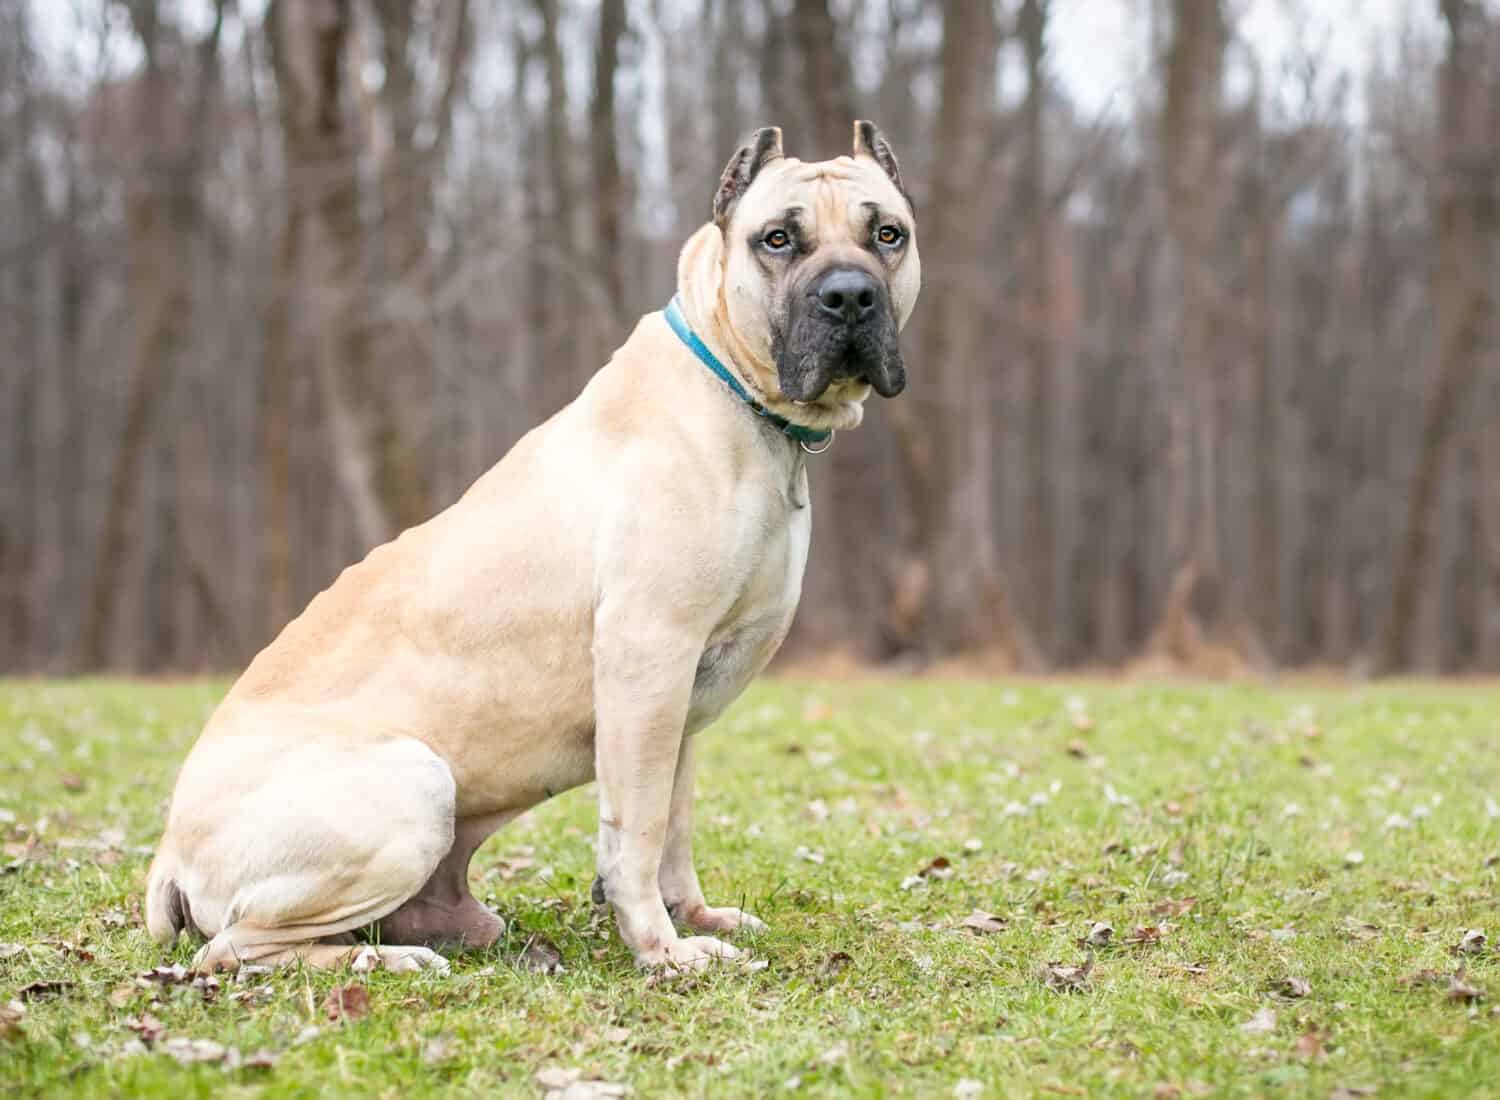 A fawn colored Cane Corso mastiff dog with cropped ears sitting outdoors